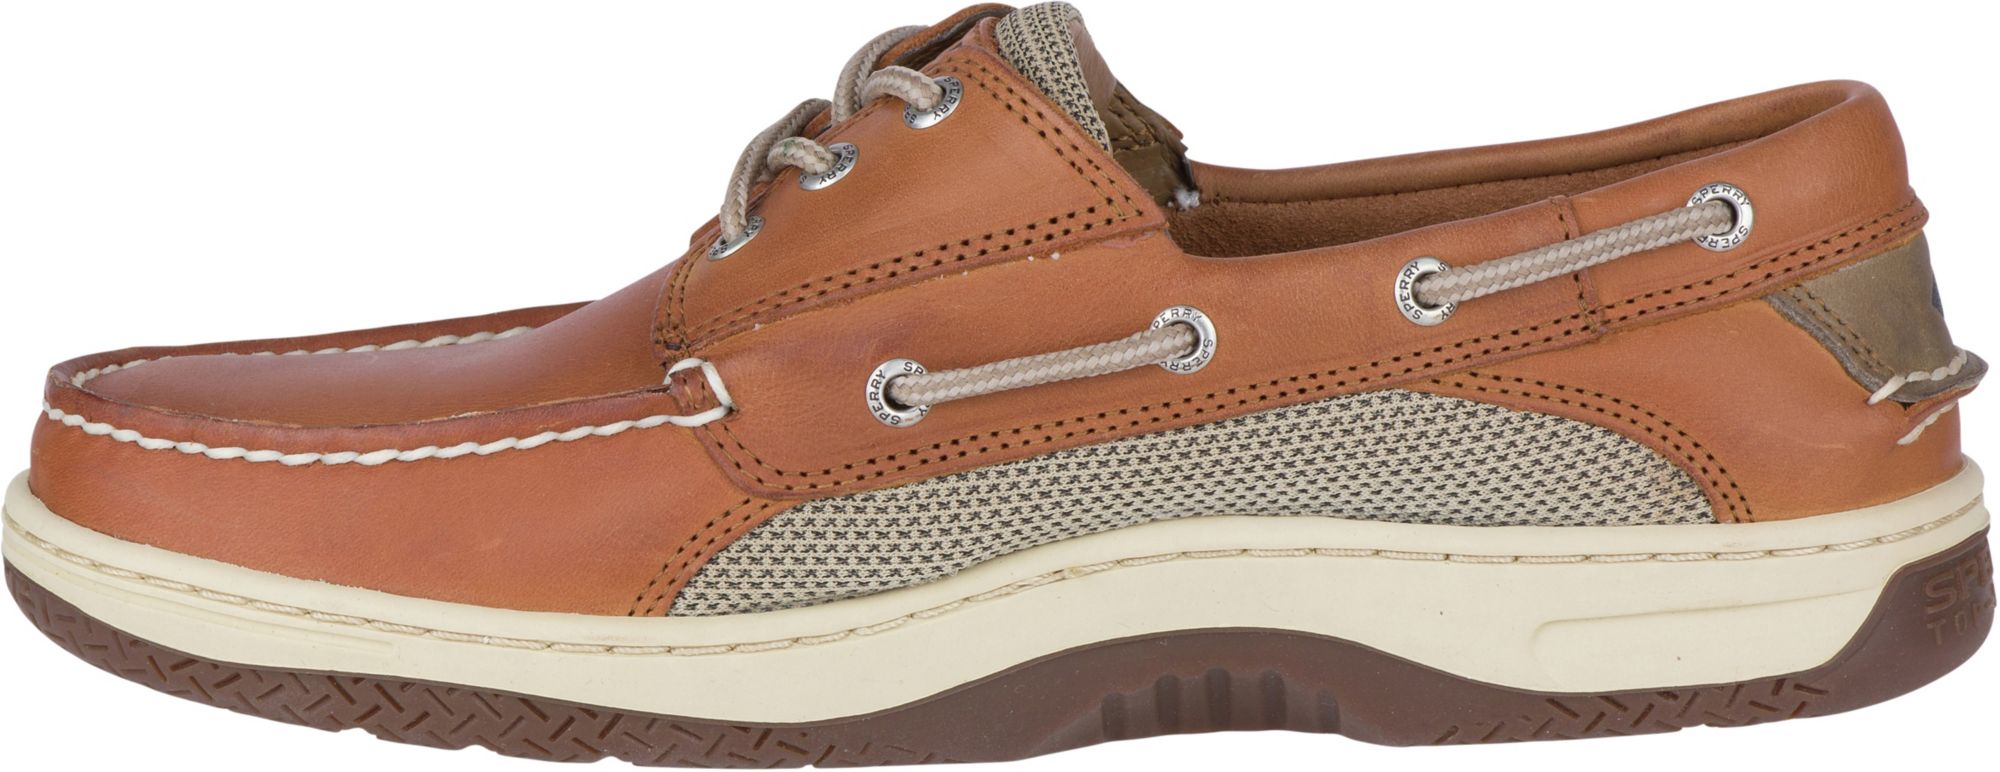 sperry top sider mens